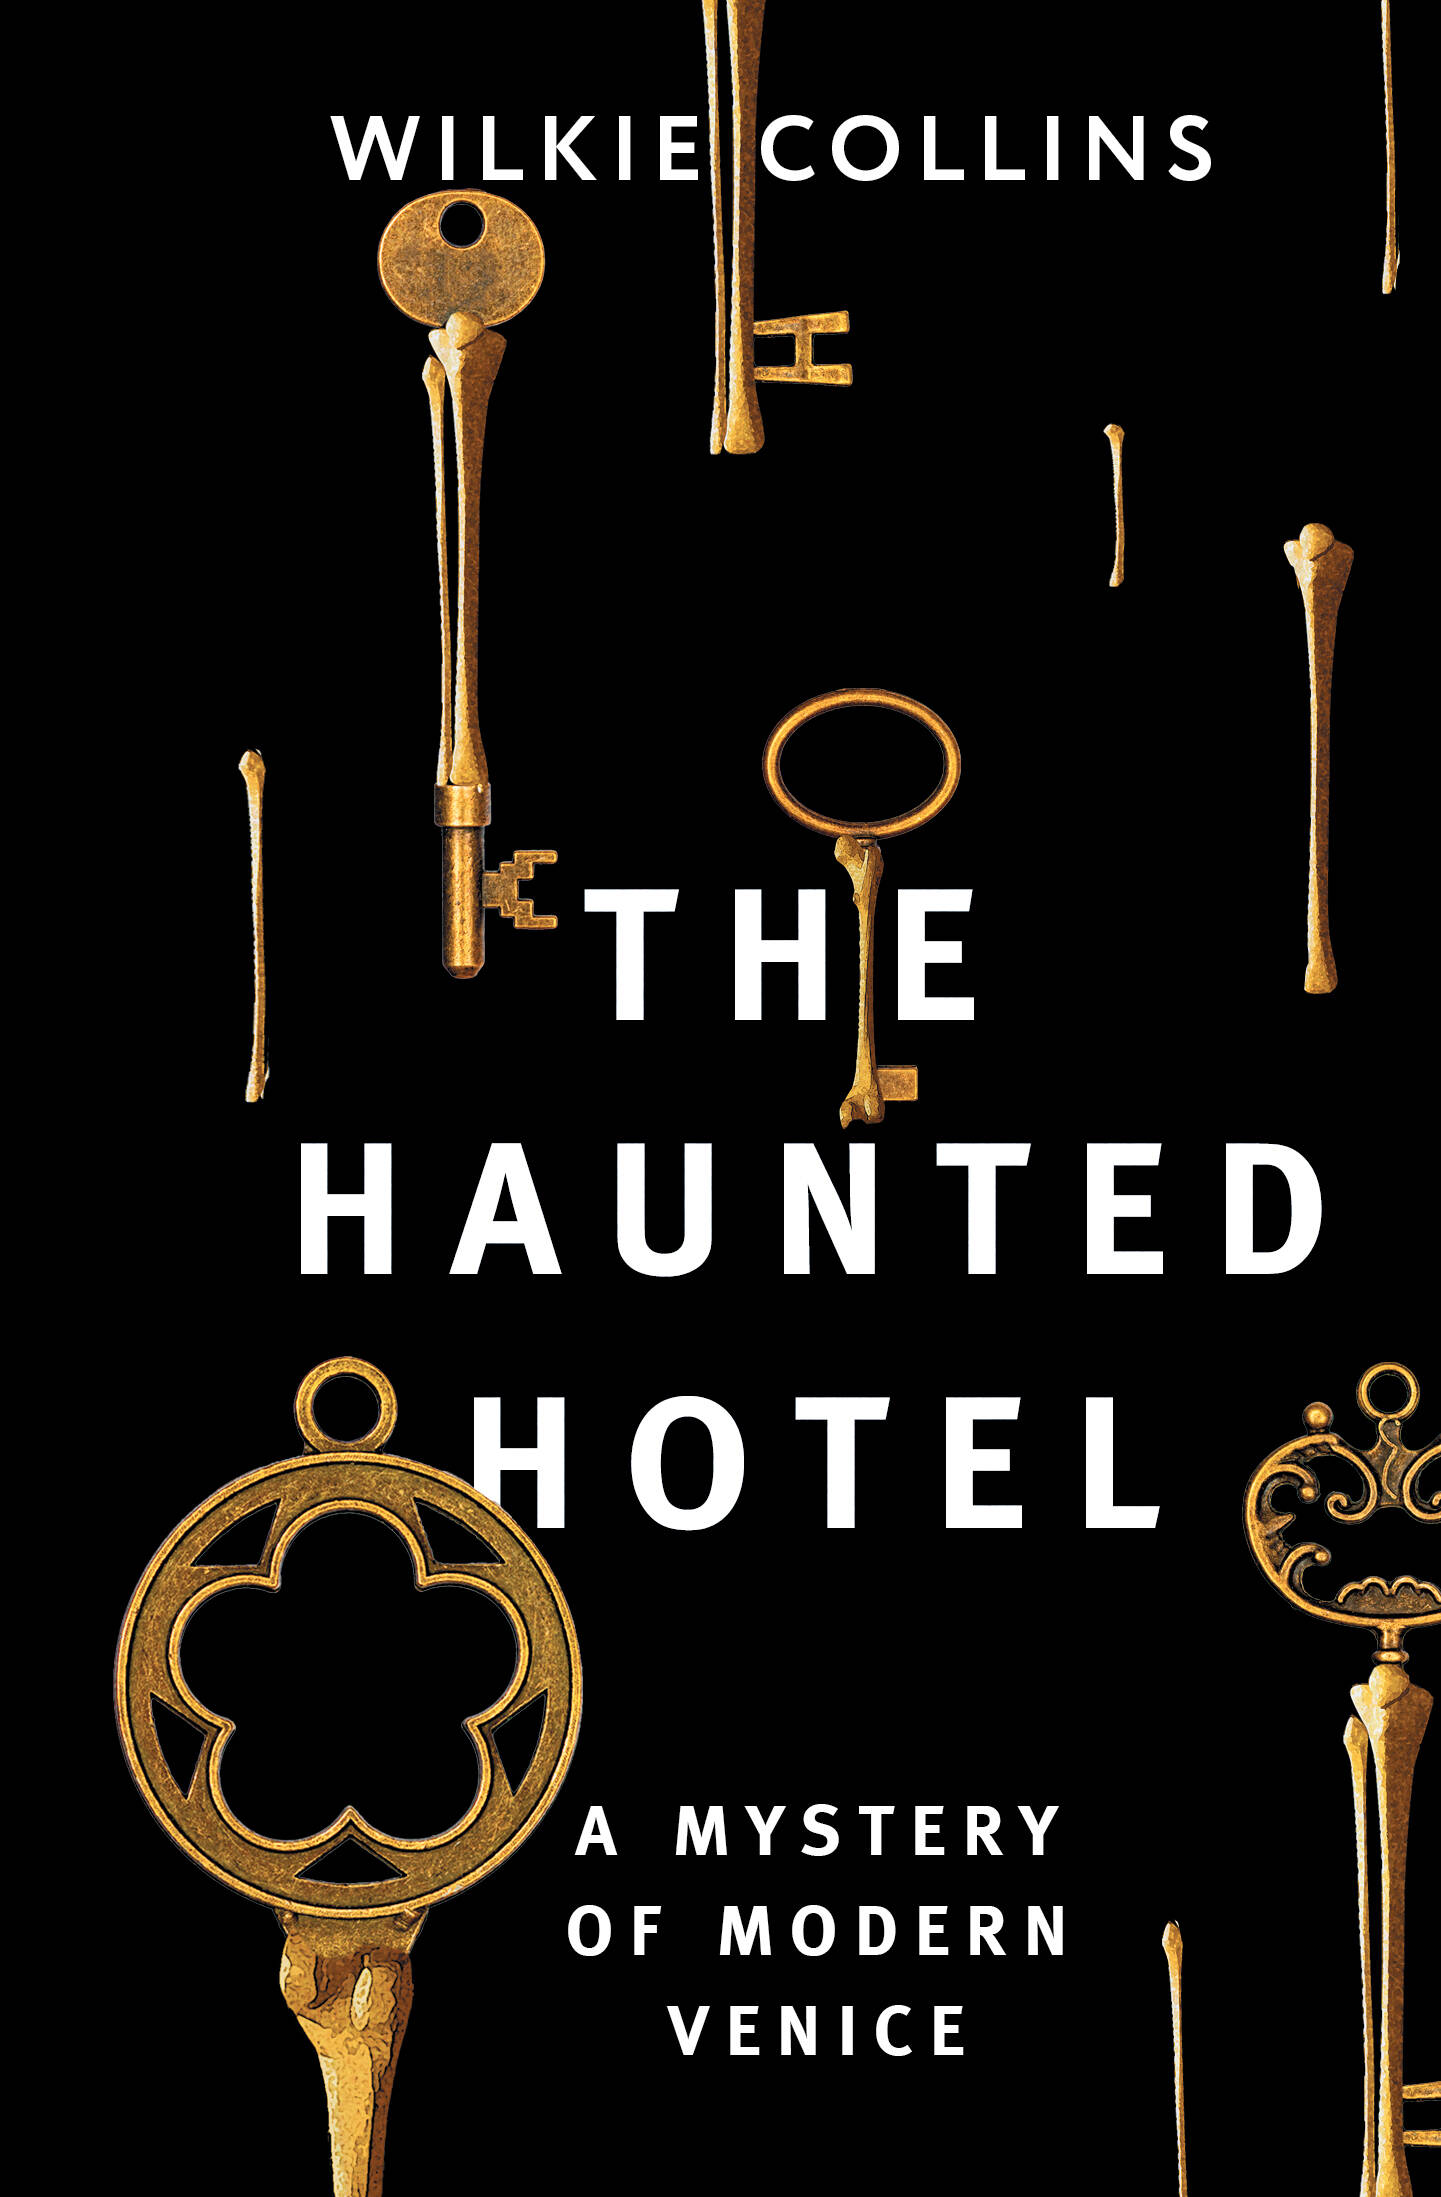 collins wilkie the haunted hotel a mystery of modern venice Collins Wilkie The Haunted Hotel: A Mystery of Modern Venice